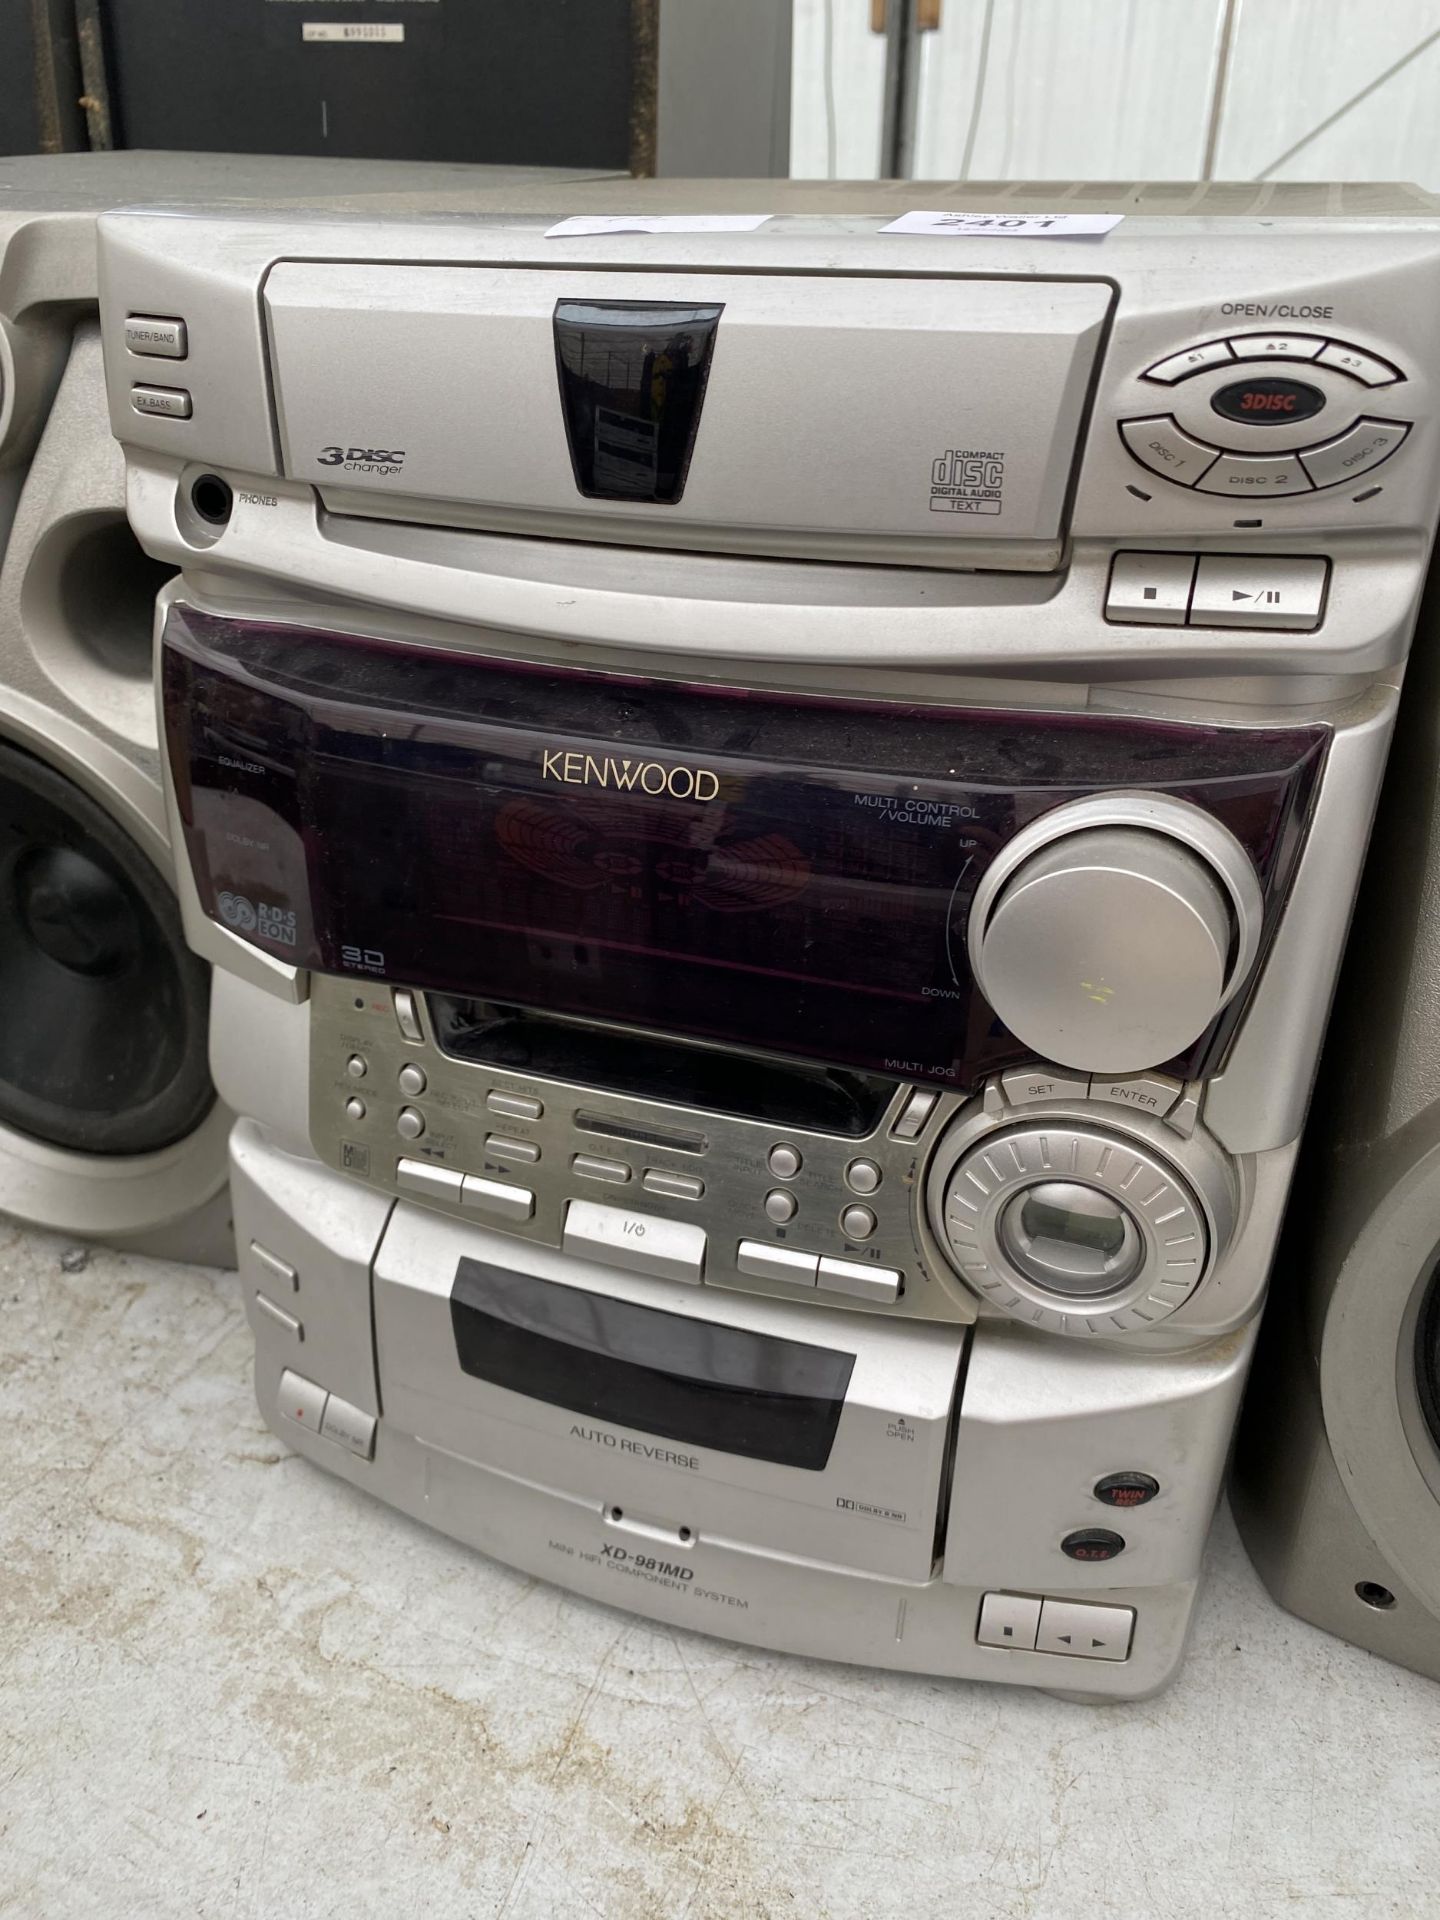 A KENWOOD STEREO SYSTEM WITH A PAIR OF KENWOOD SPEAKERS - Image 2 of 2